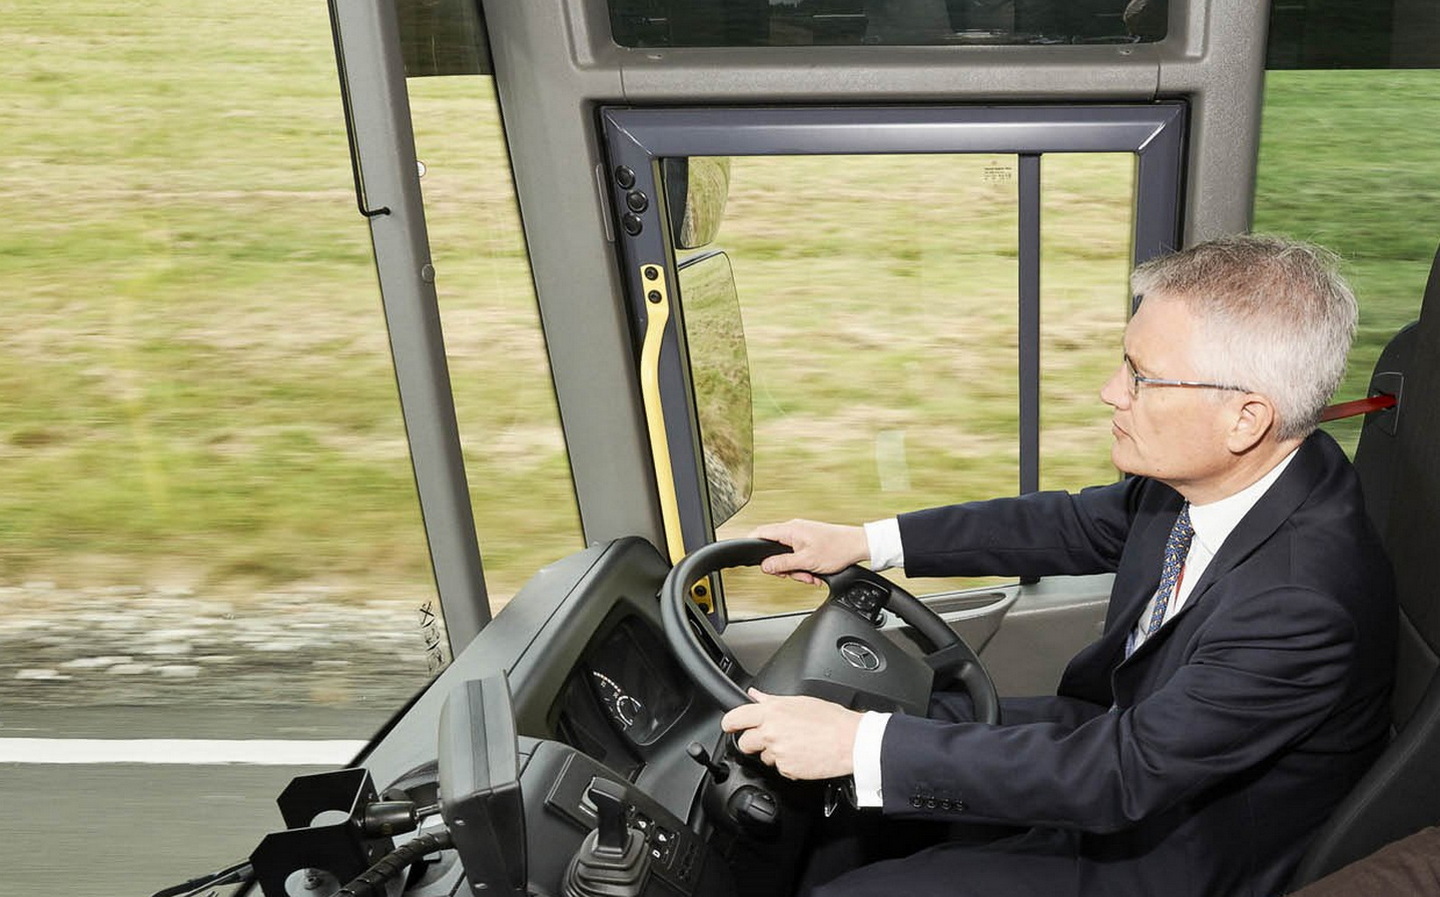 Learning to drive an HGV